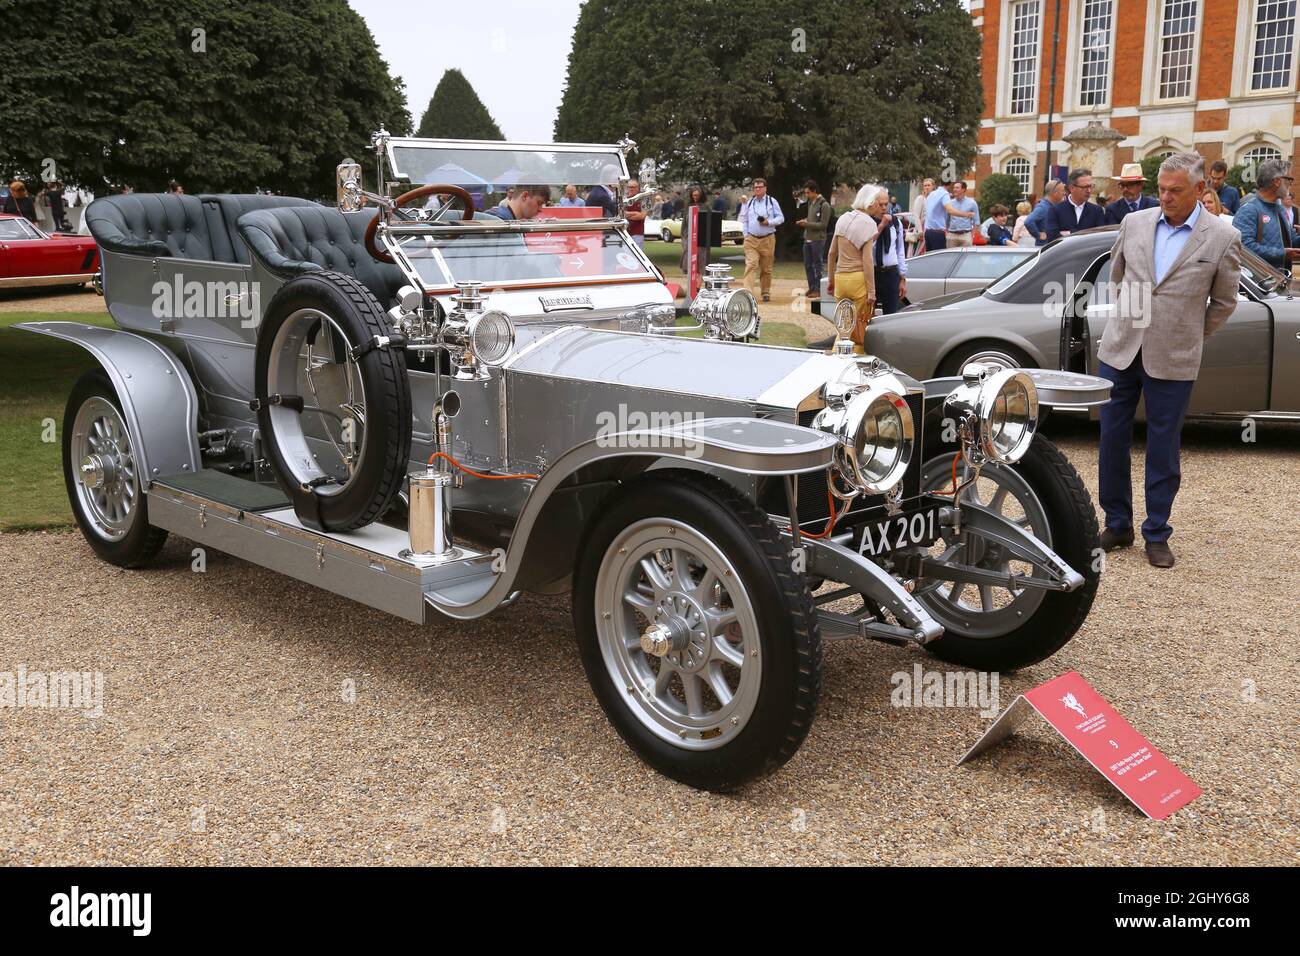 Rolls-Royce 40/50 Silver Ghost (1907), Concours of Elegance 2021, Hampton Court Palace, London, UK, Europe Stock Photo